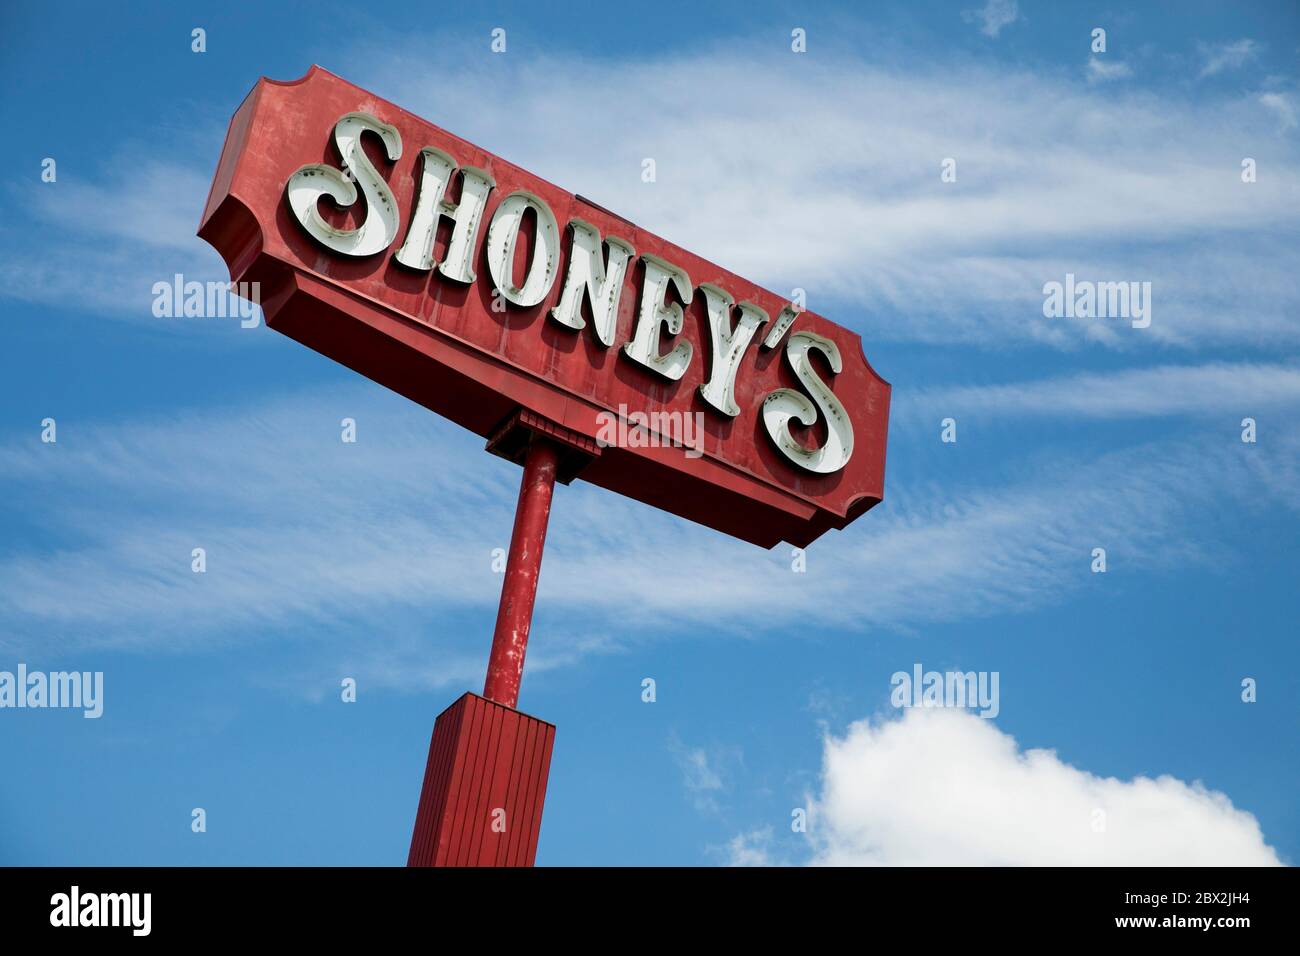 A logo sign outside of a Shoney's restaurant location in Sutton, West Virginia on May 29, 2020. Stock Photo